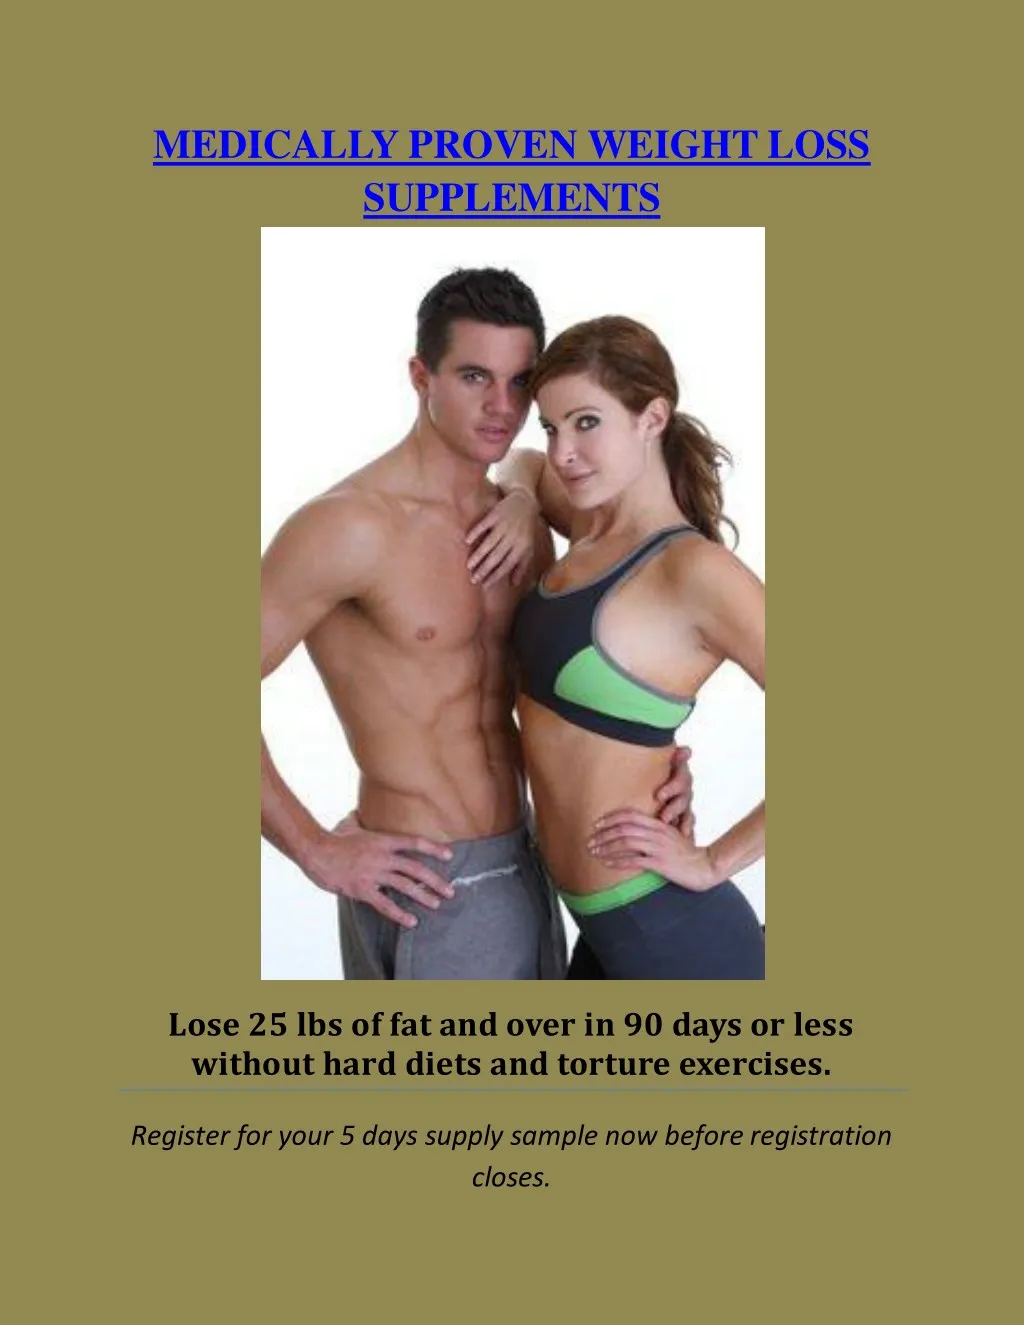 medically proven weight loss supplements